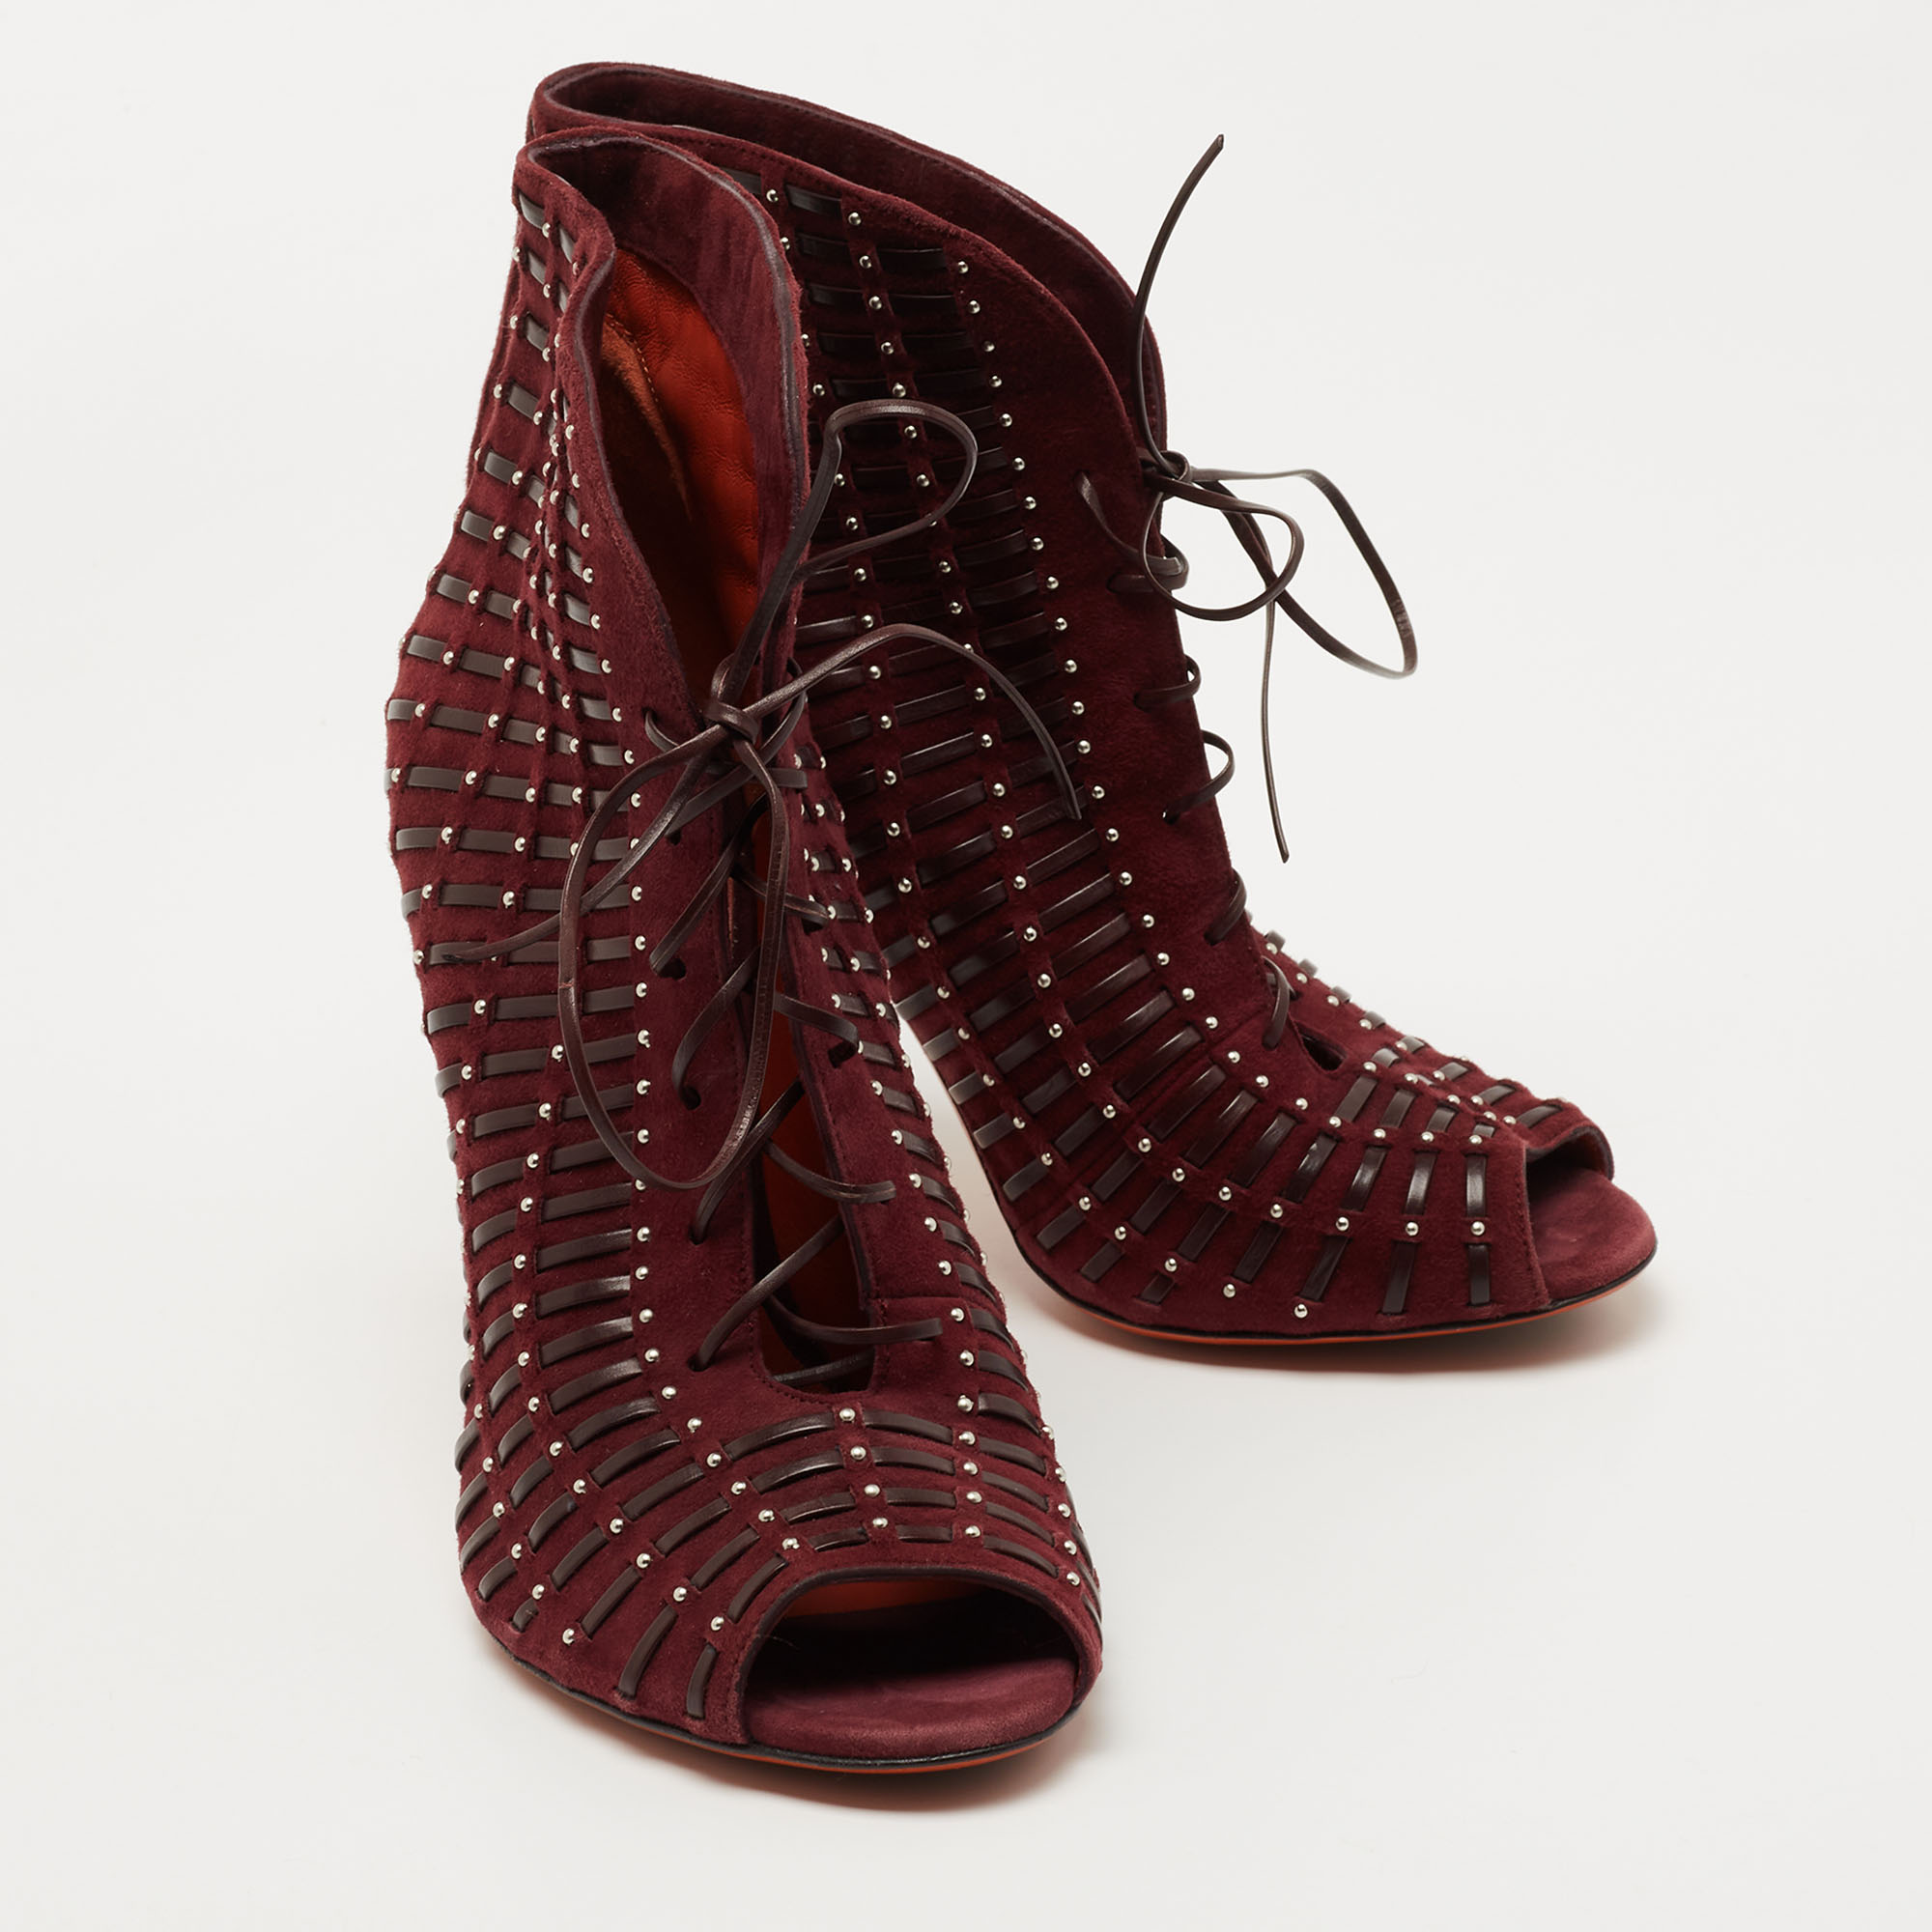 Santoni Burgundy Suede And Leather Peep Toe Lace Up Ankle Booties Size 37.5